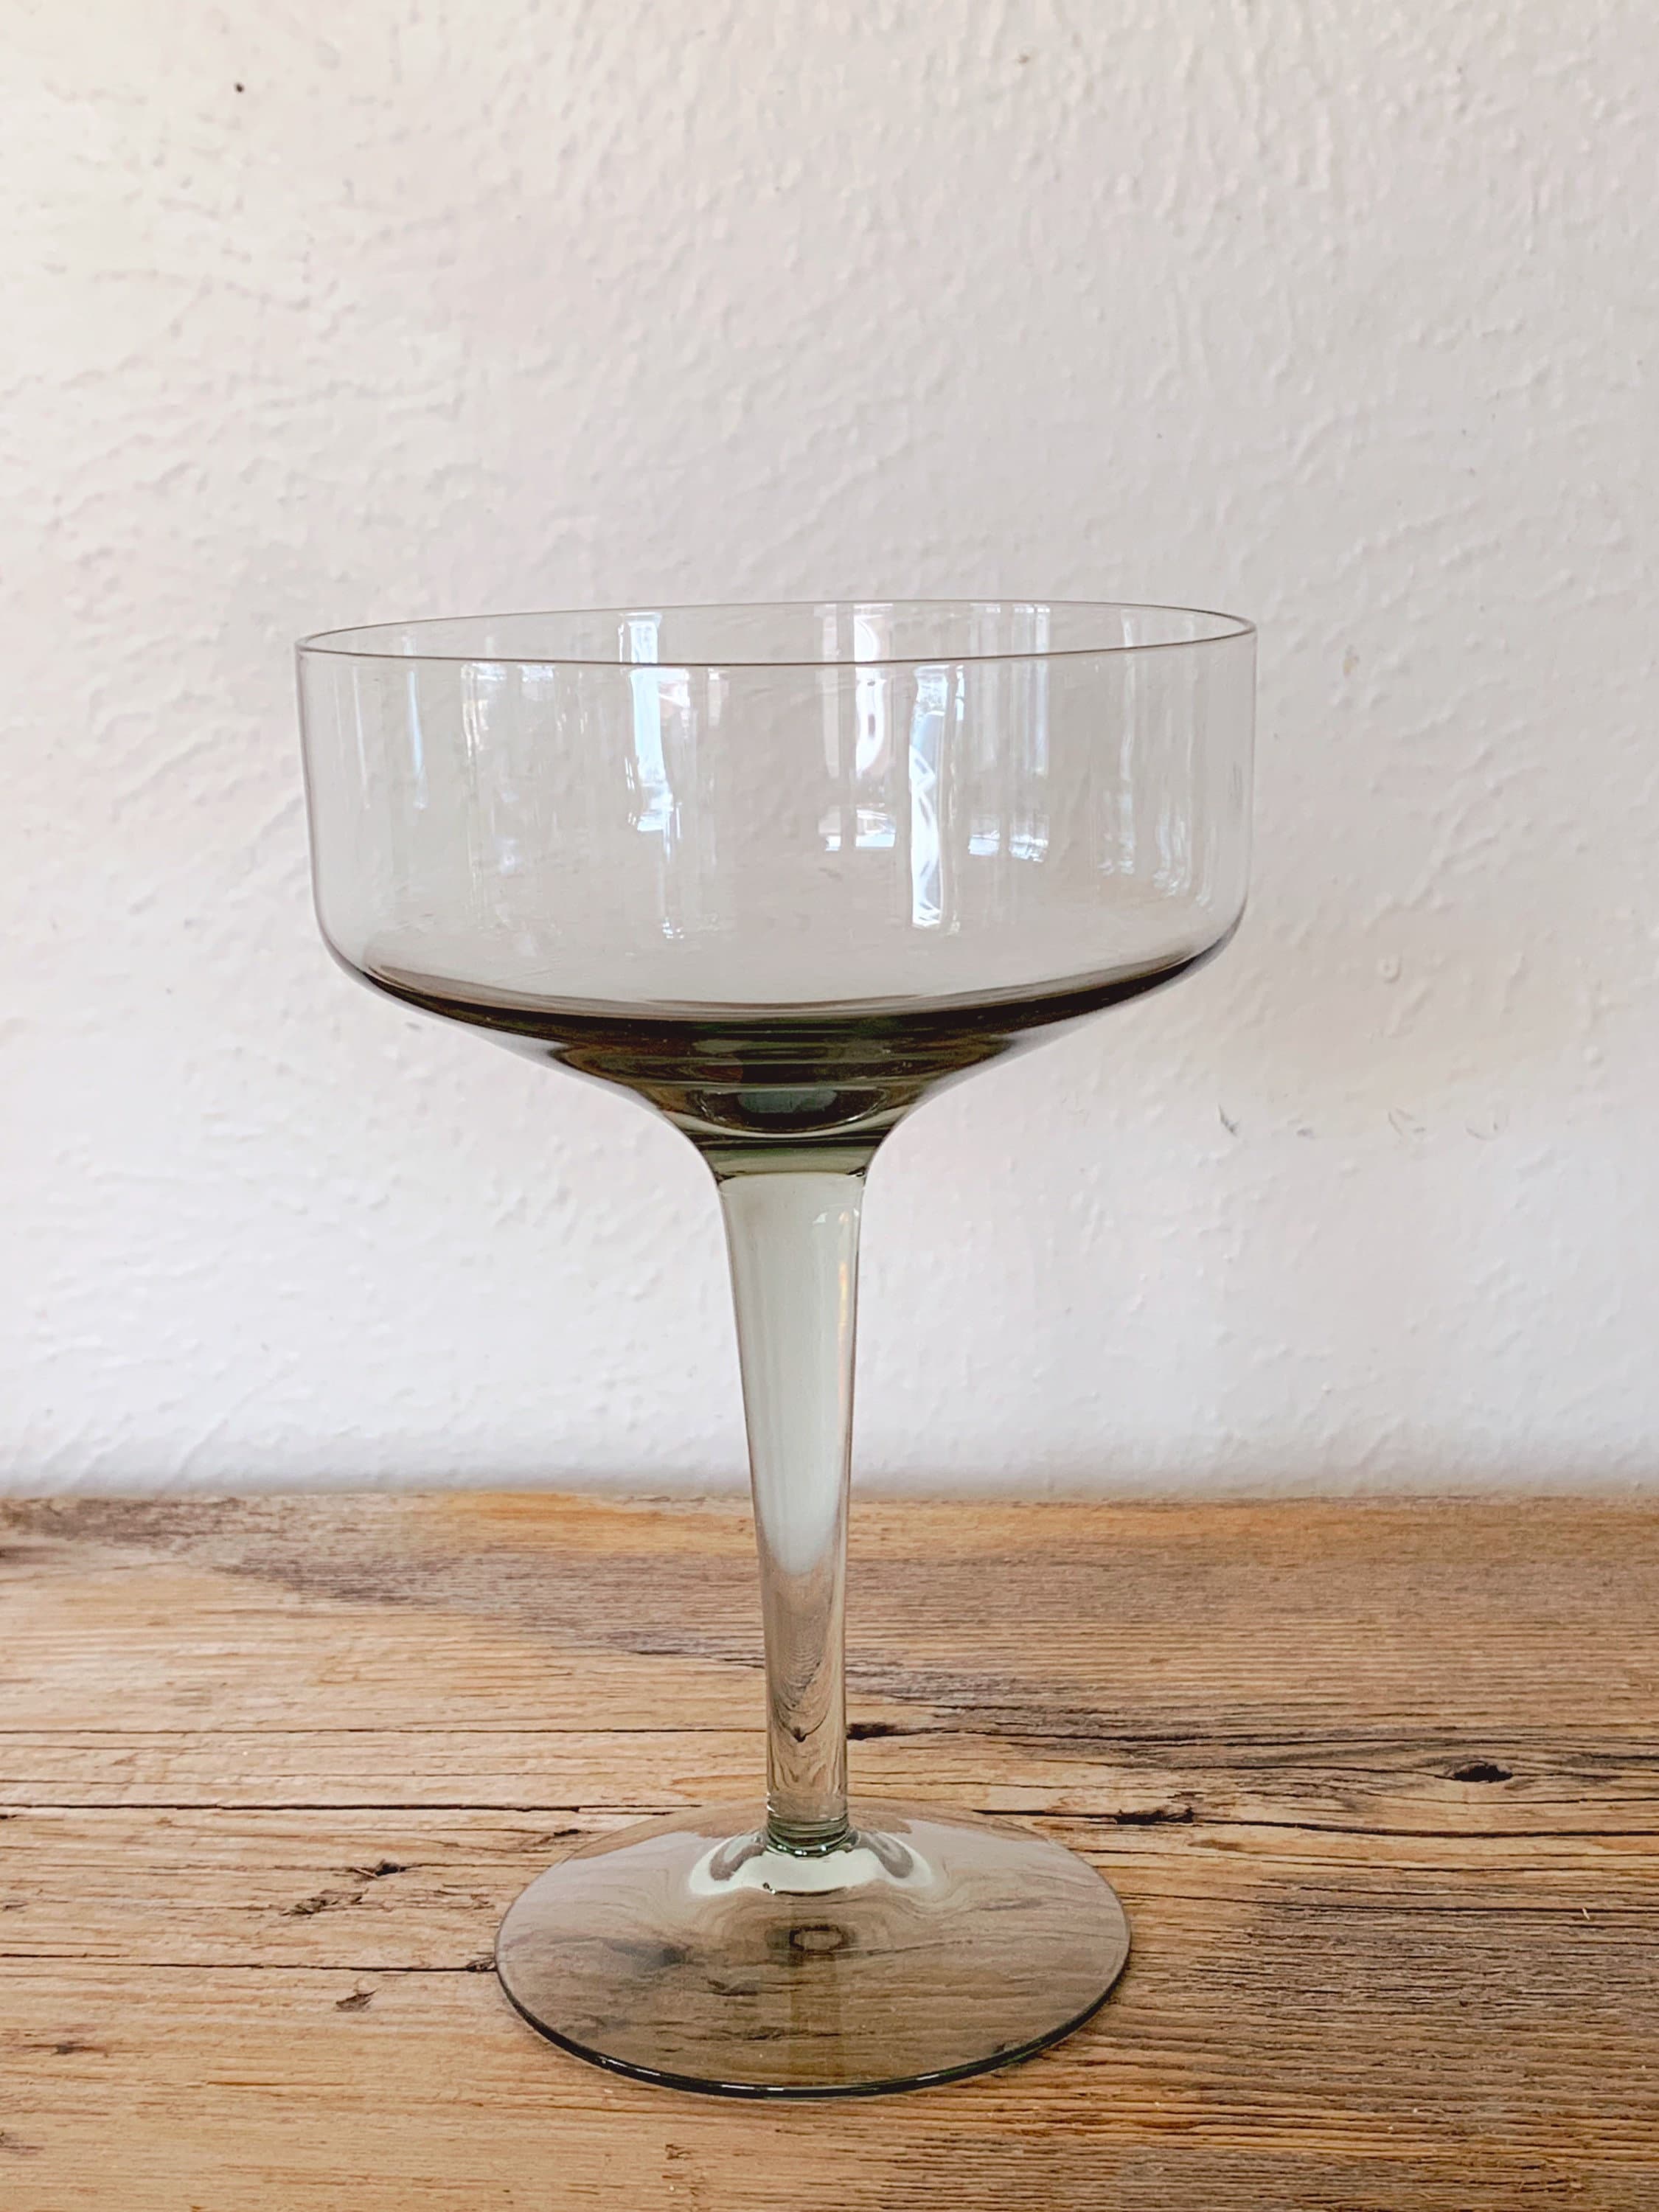 Wine Glasses, no stem, For Rent in North Hollywood